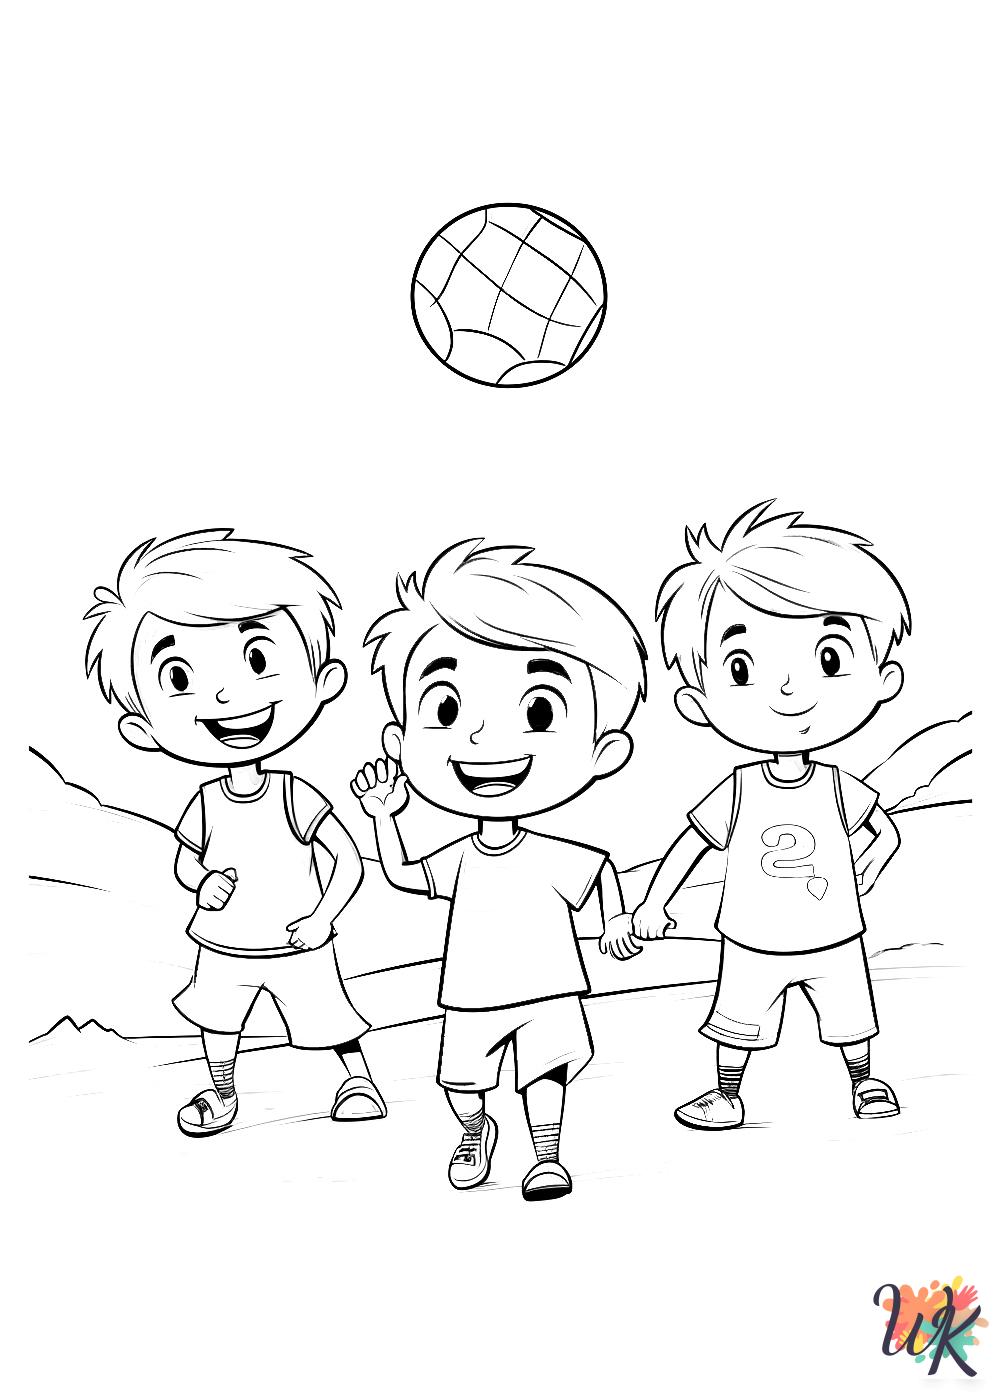 free Volleyball coloring pages for adults